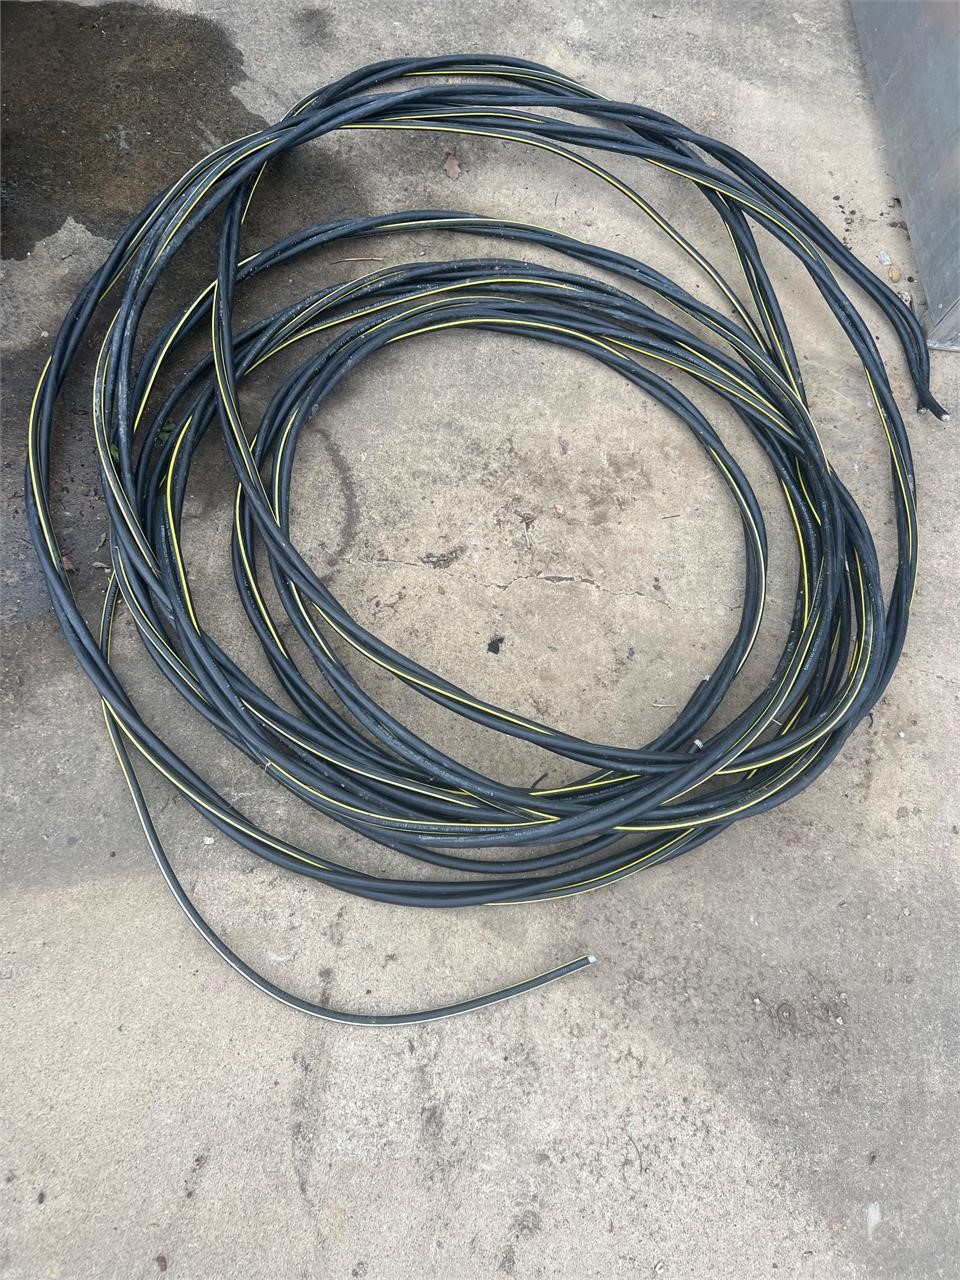 APPROX 80’ OF 4/0 WIRE (3 STRAND ALUMINUM)